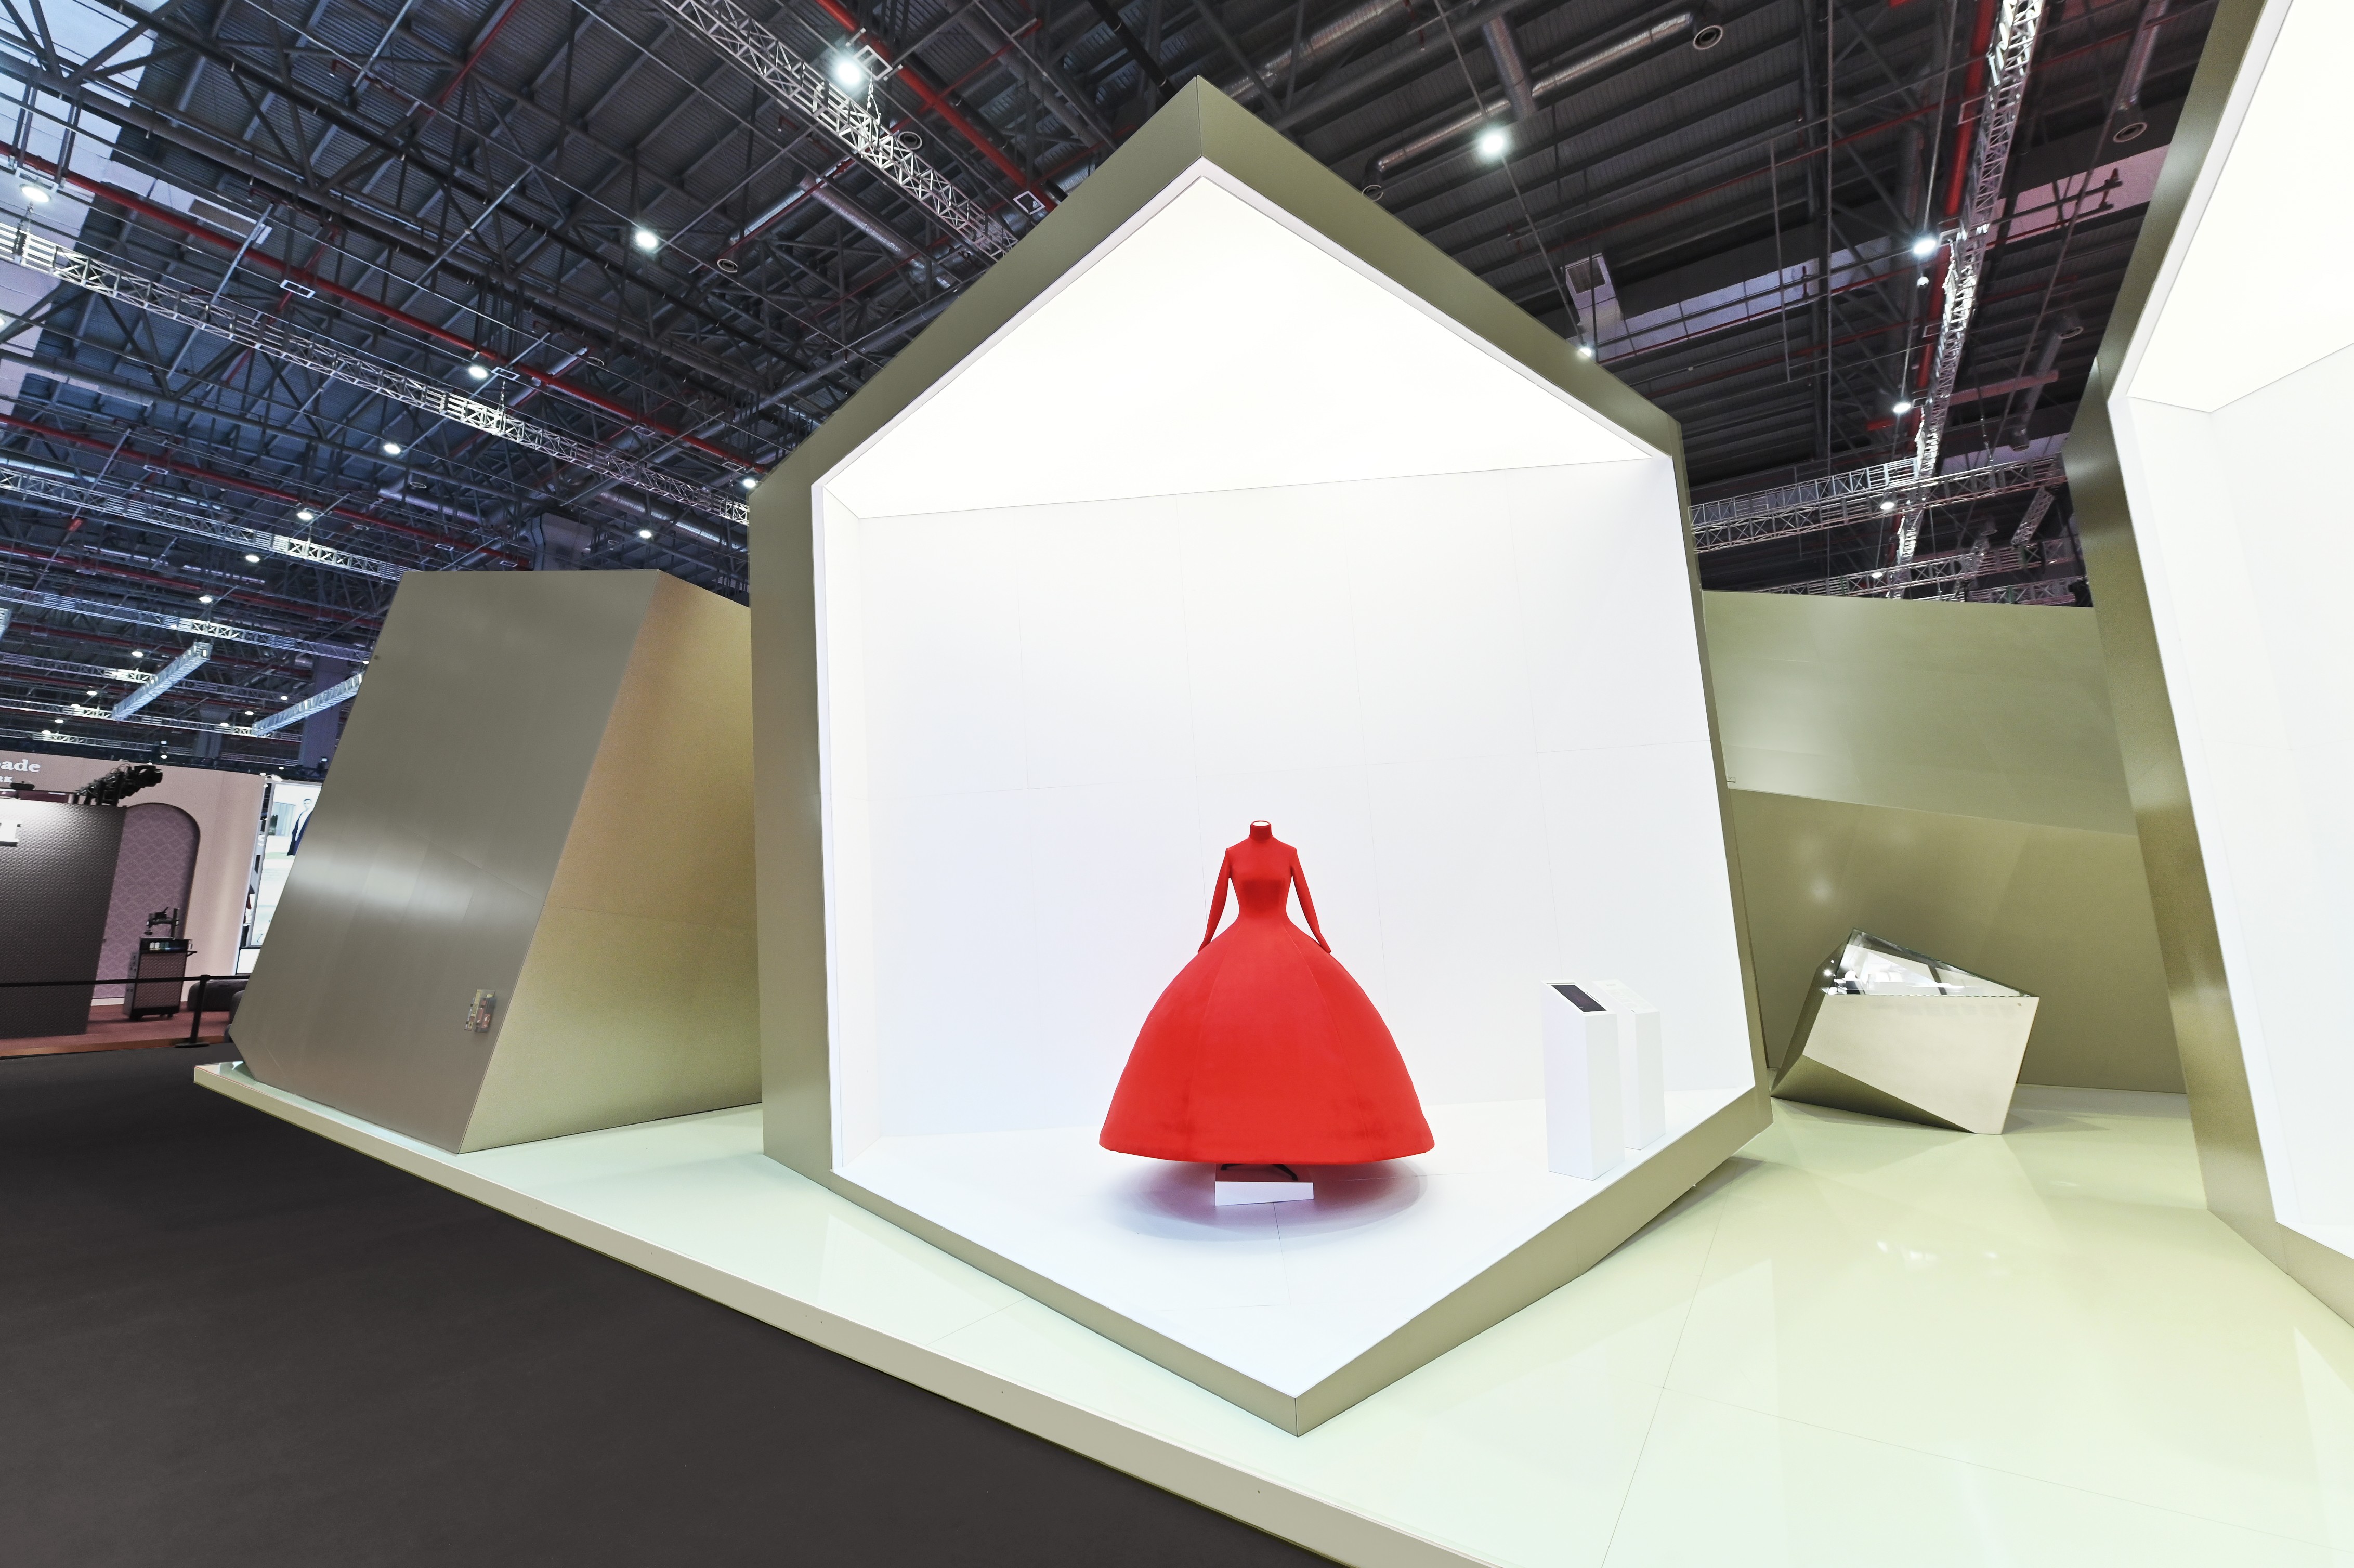 Kering’s immersive Pavilion by Ole Scheeren at the 2019 Import Expo in Shanghai. Photo: Buro-OS/Kering